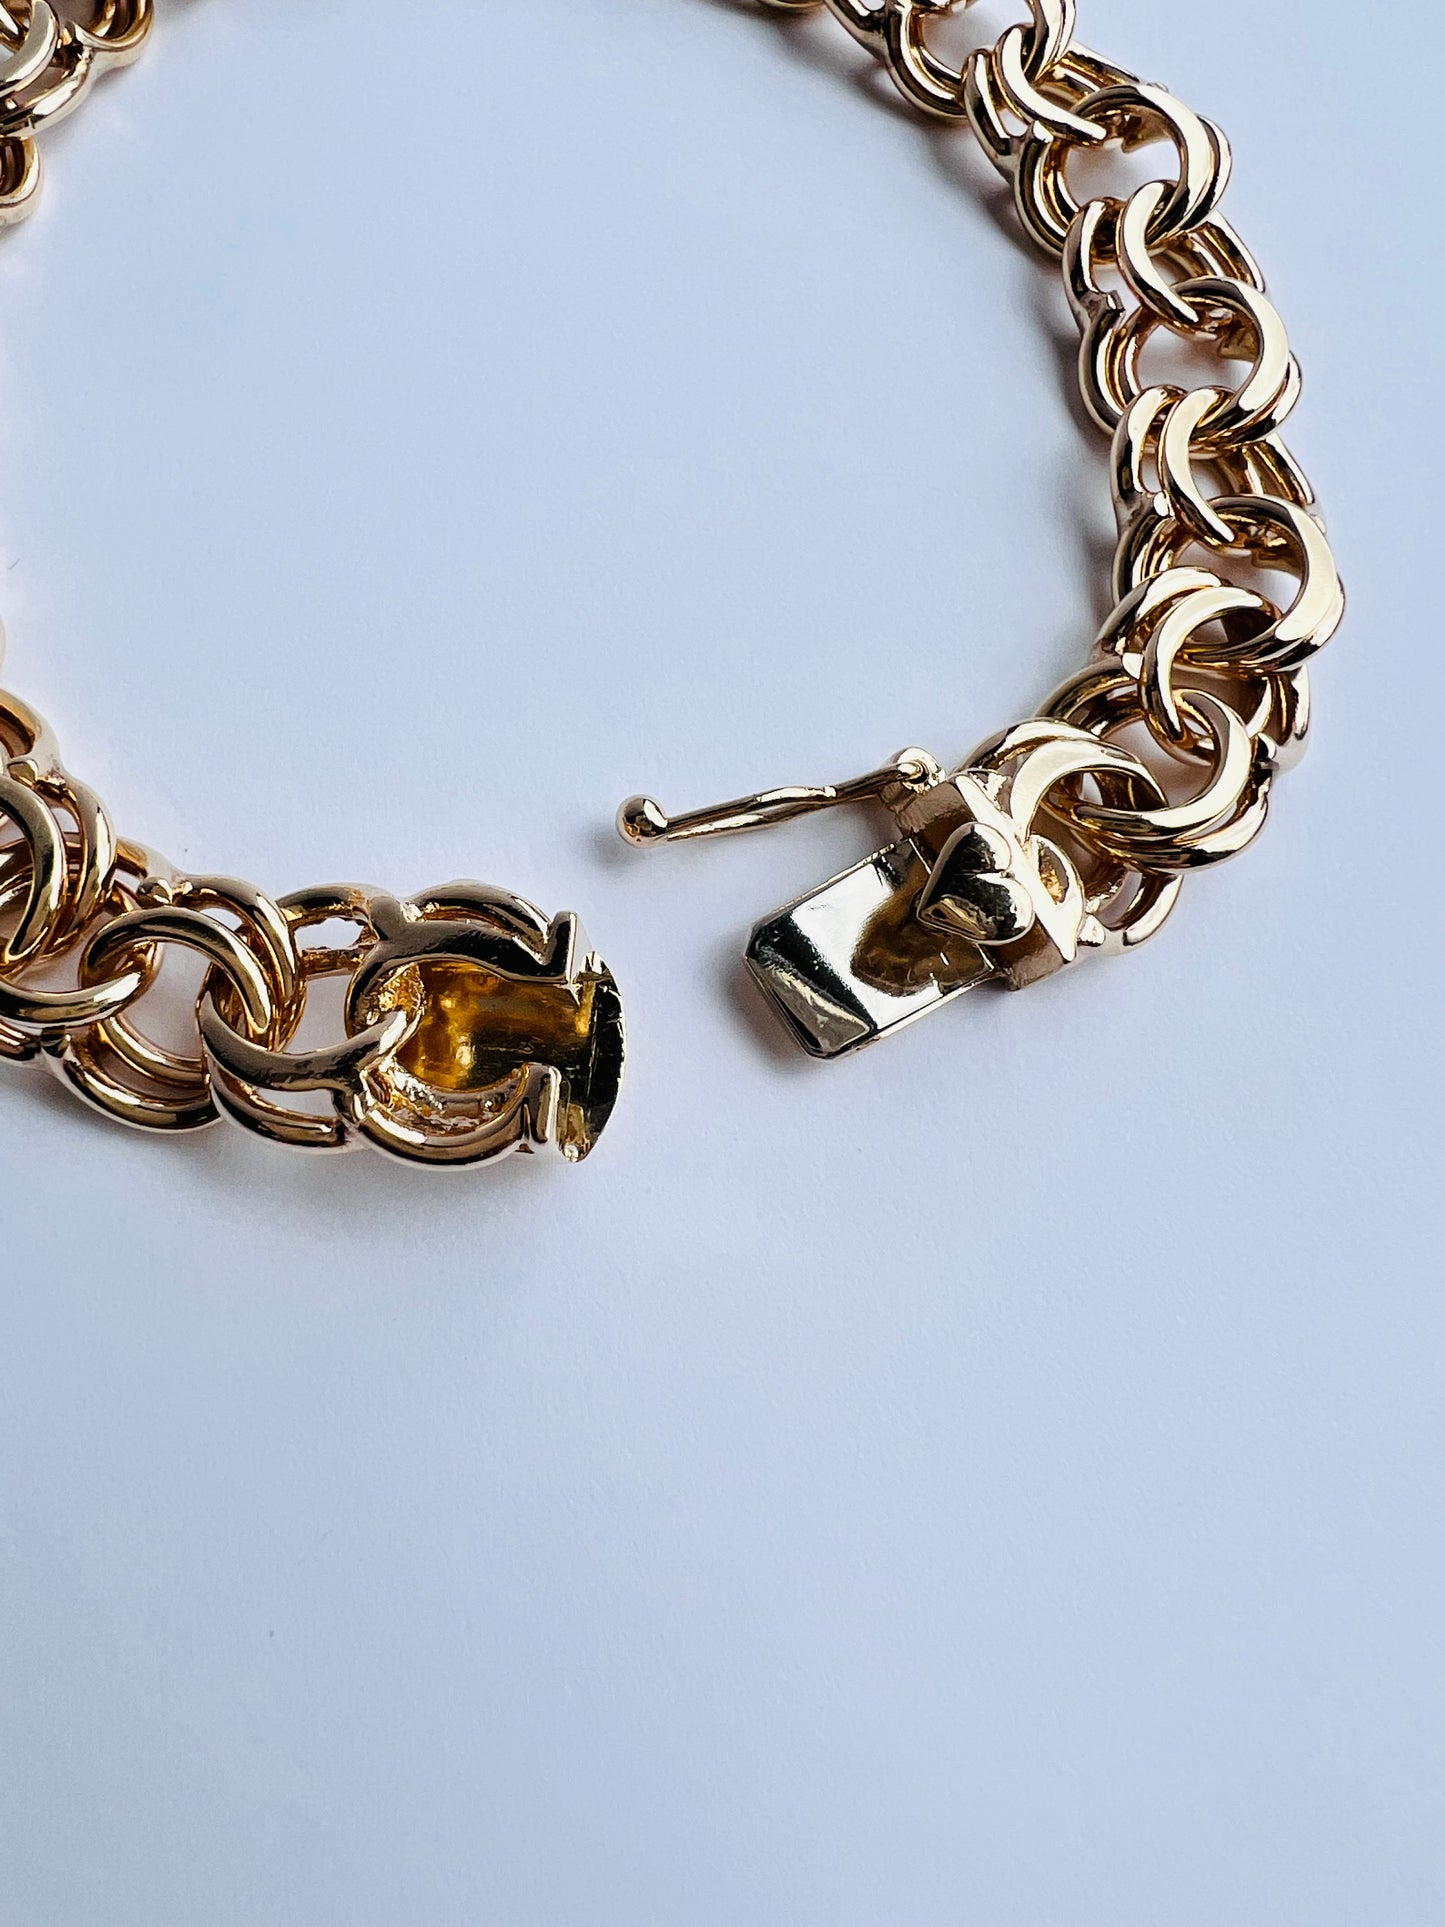 14K Yellow 8" Bracelet with Heart Clasp- Adorable!